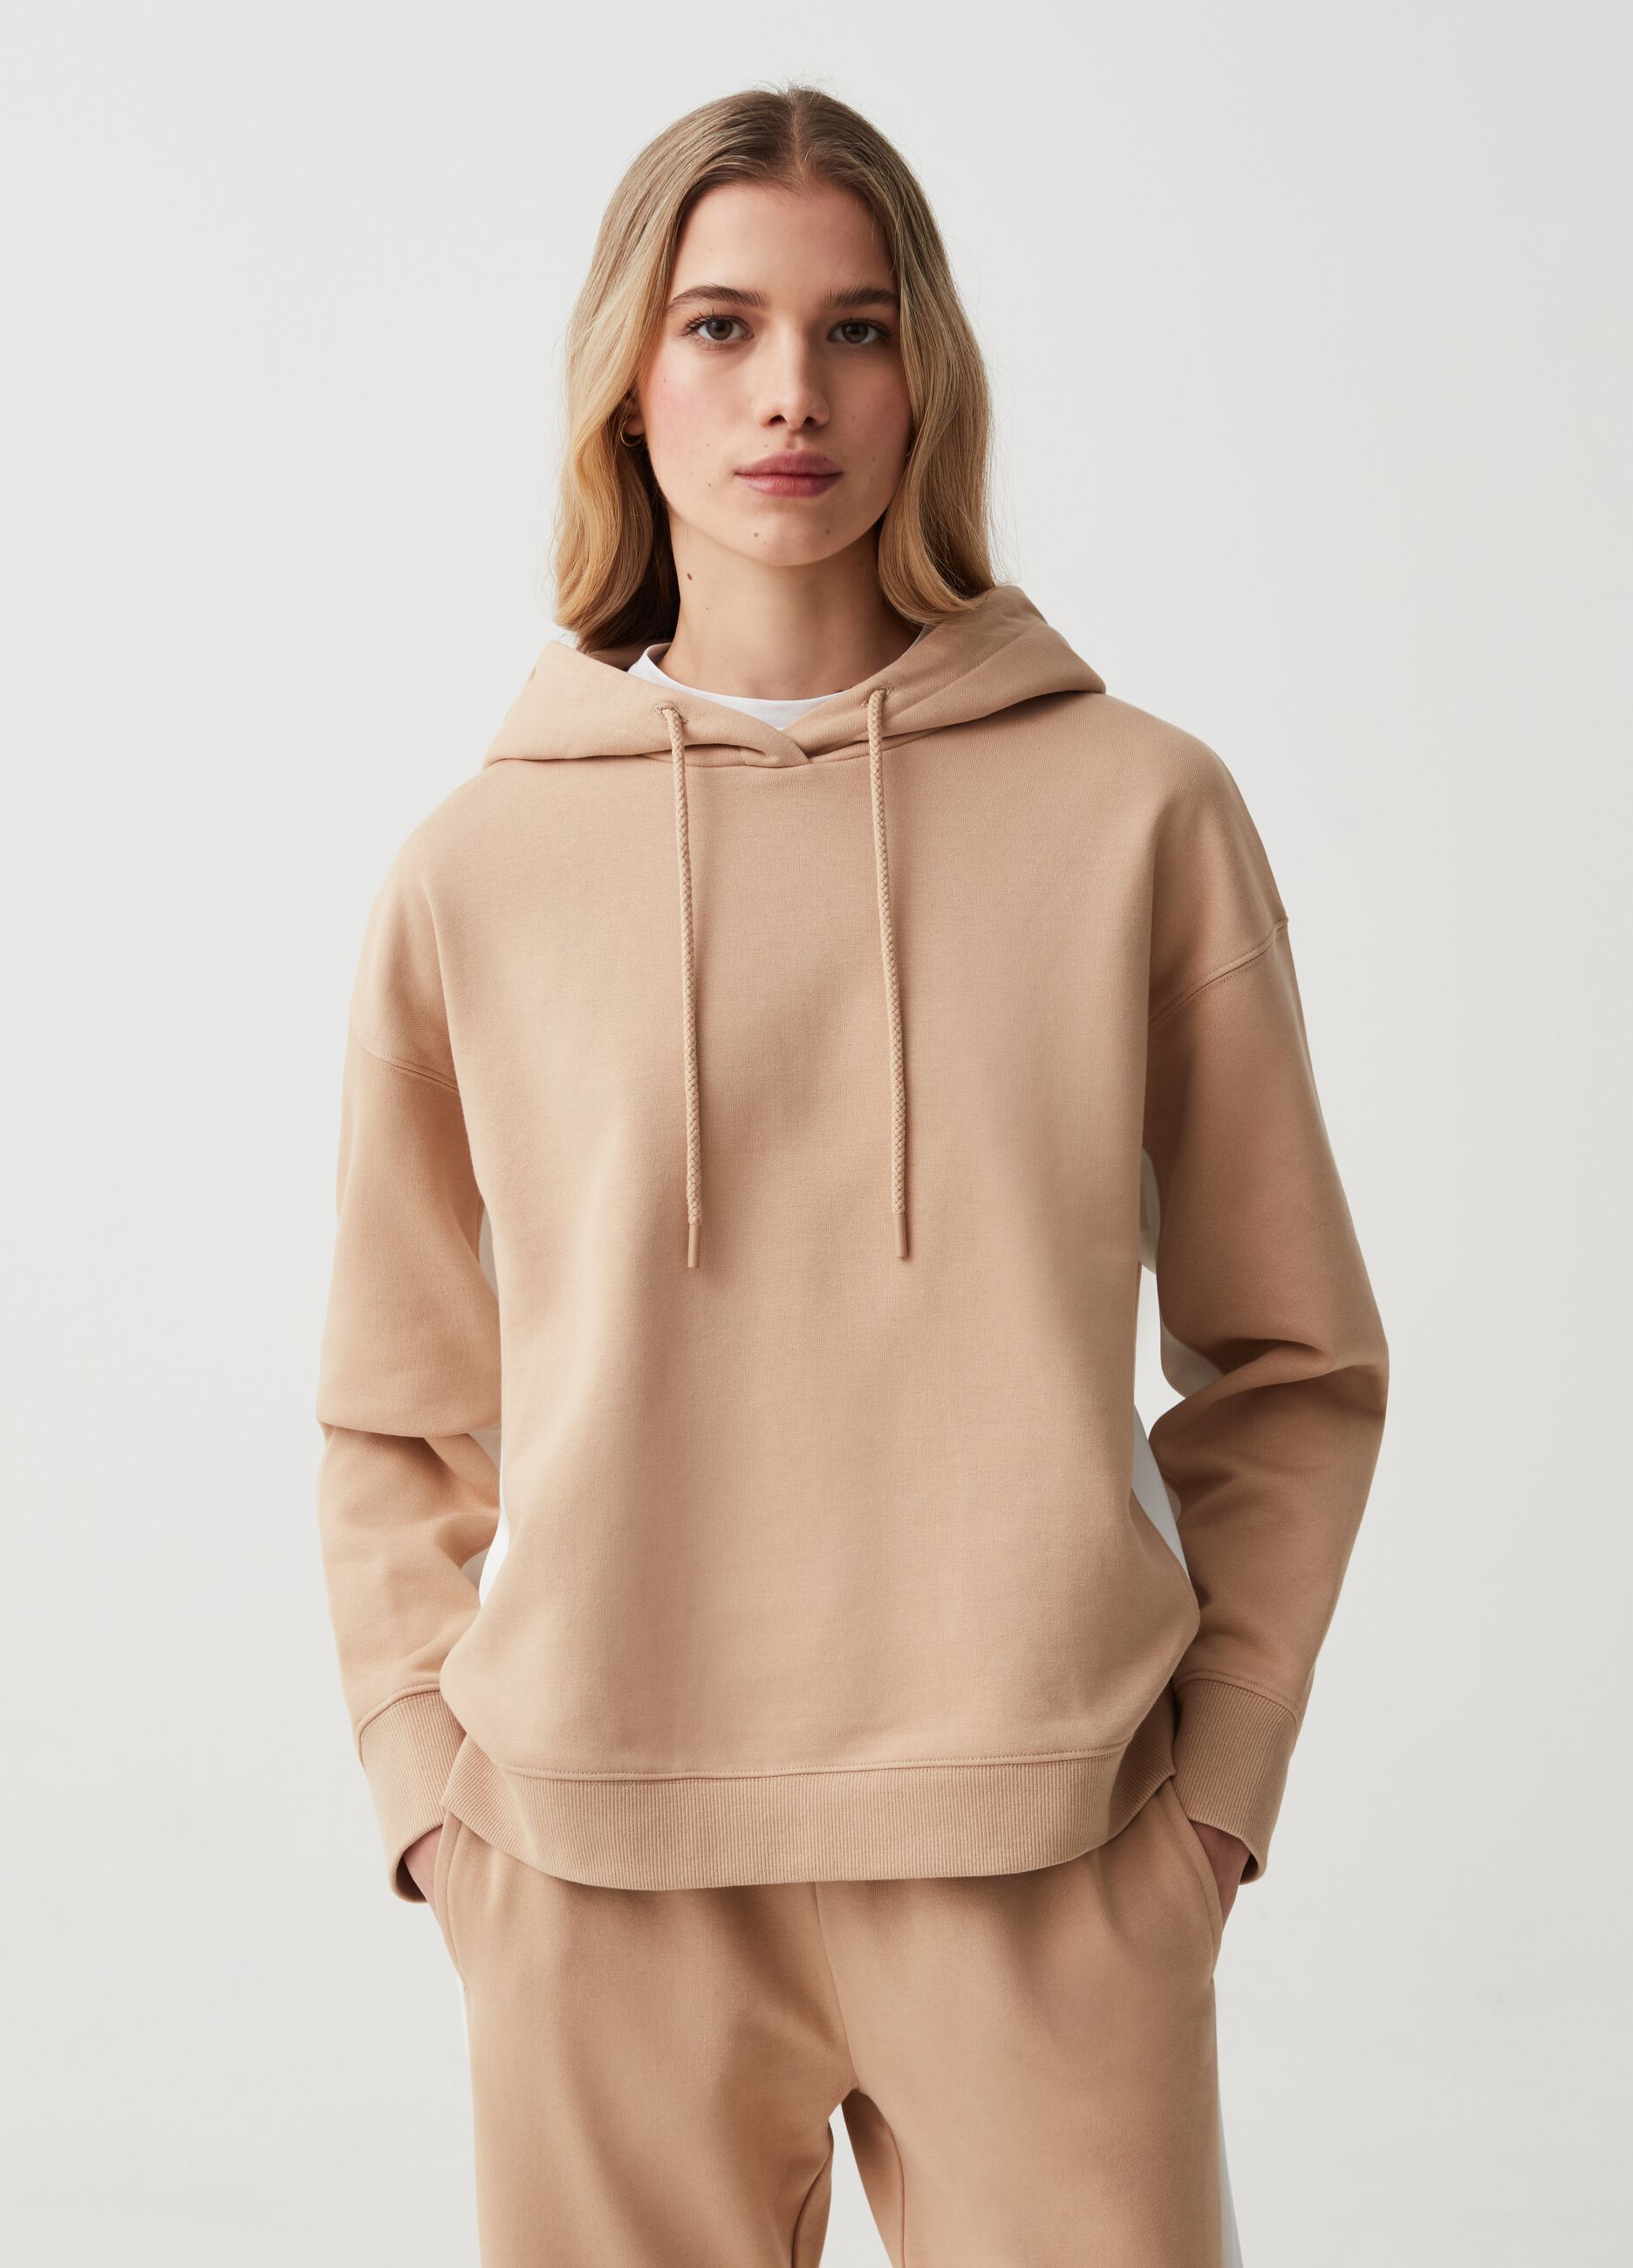 Essential sweatshirt with hood and contrasting bands